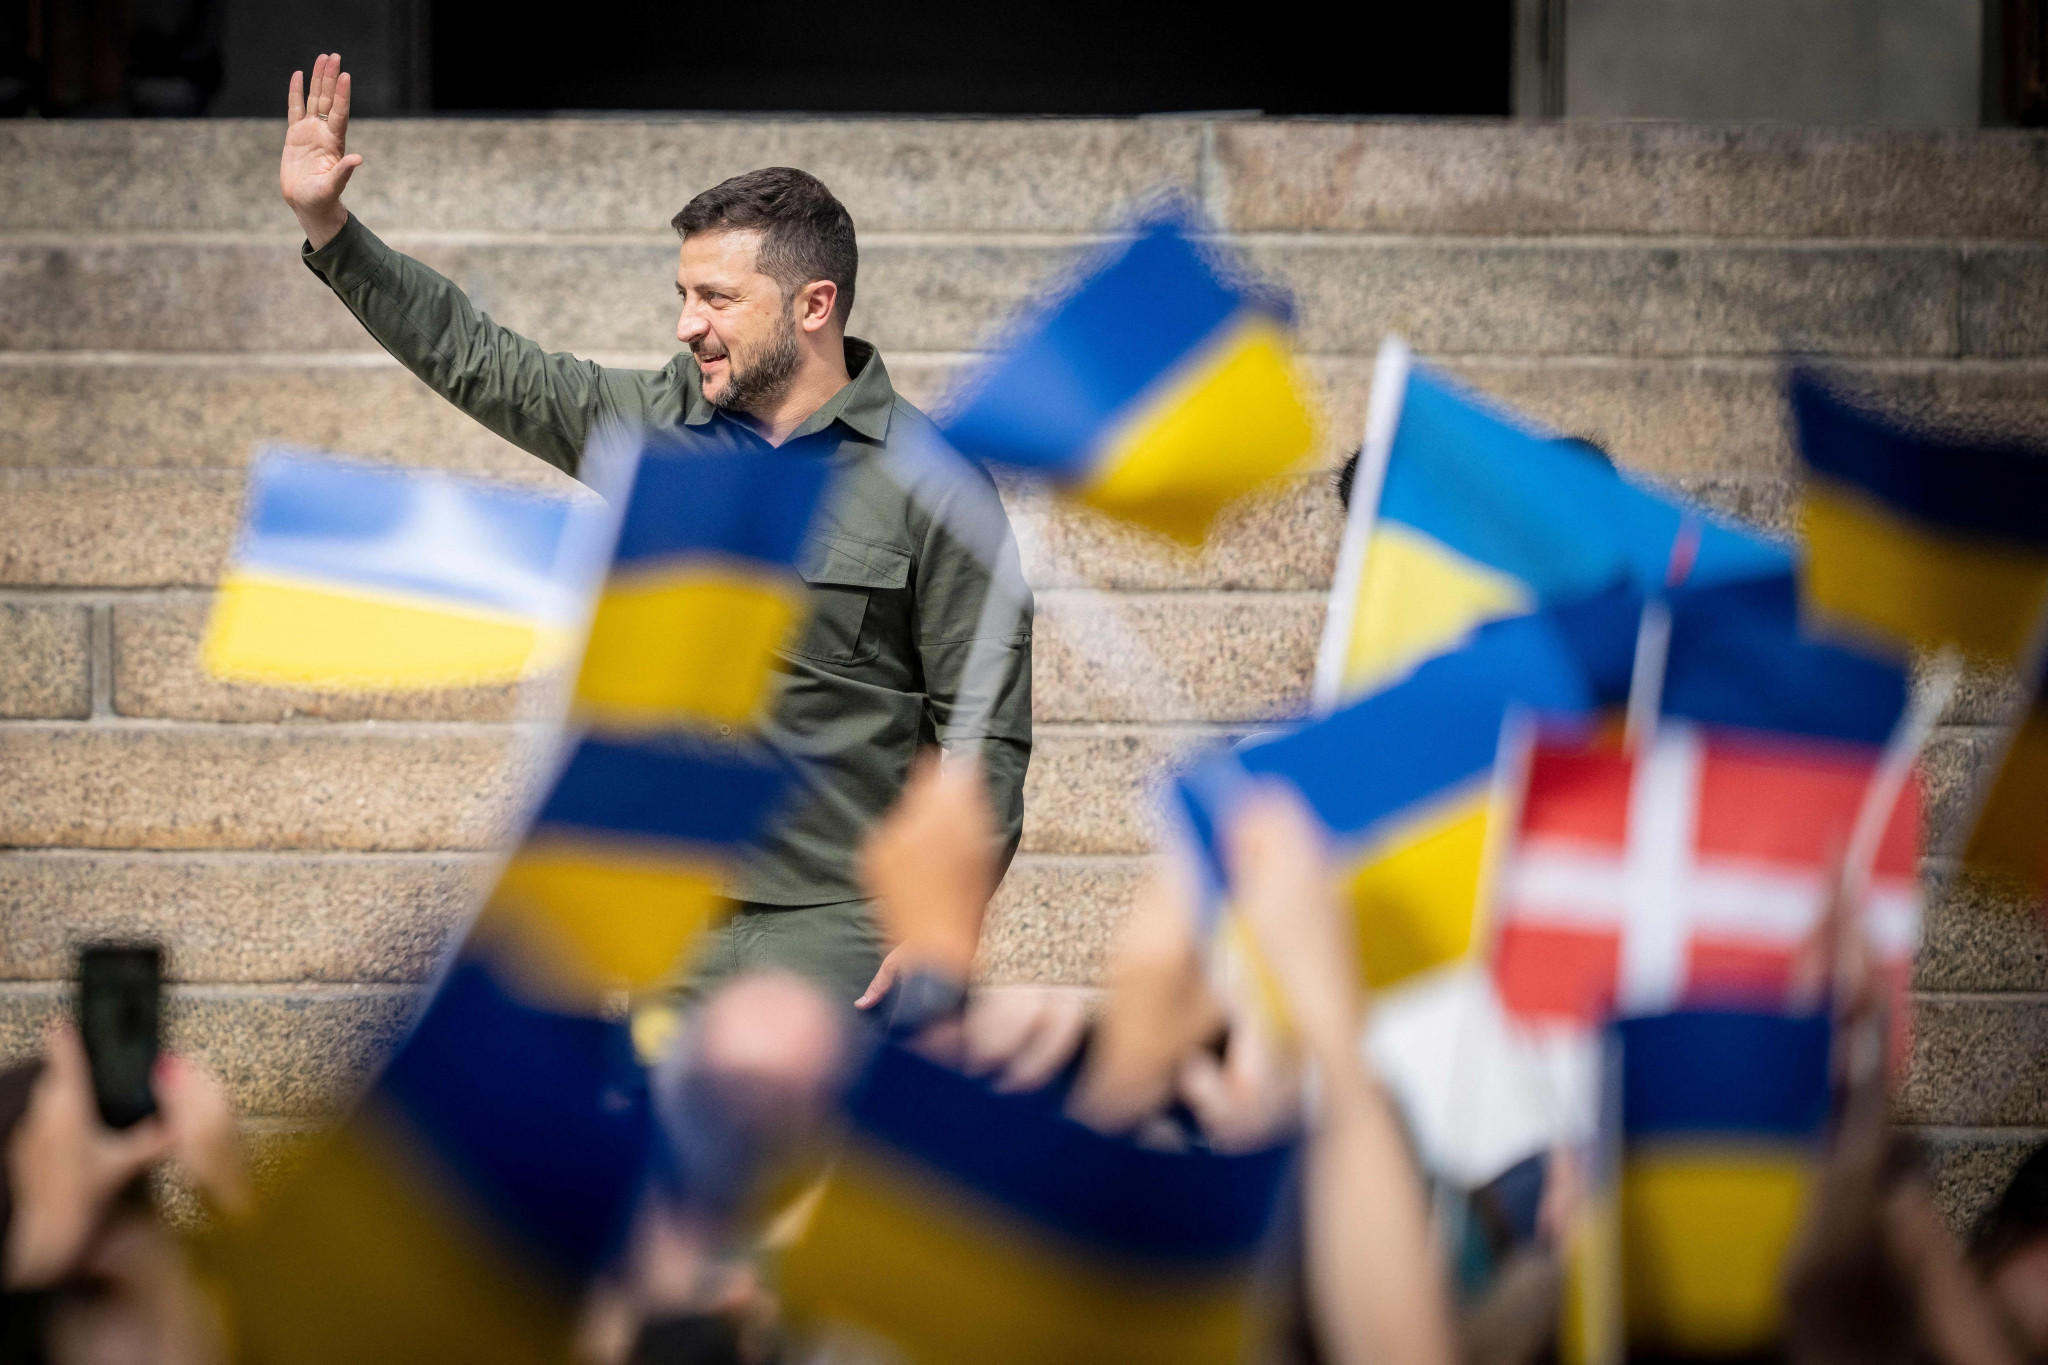 Thomas Lund, secretary general for the BWF, claimed that heightened security around the visit of Ukrainian President Volodymyr Zelenskyy could have been one of the factors behind the transport problems ©Getty Images